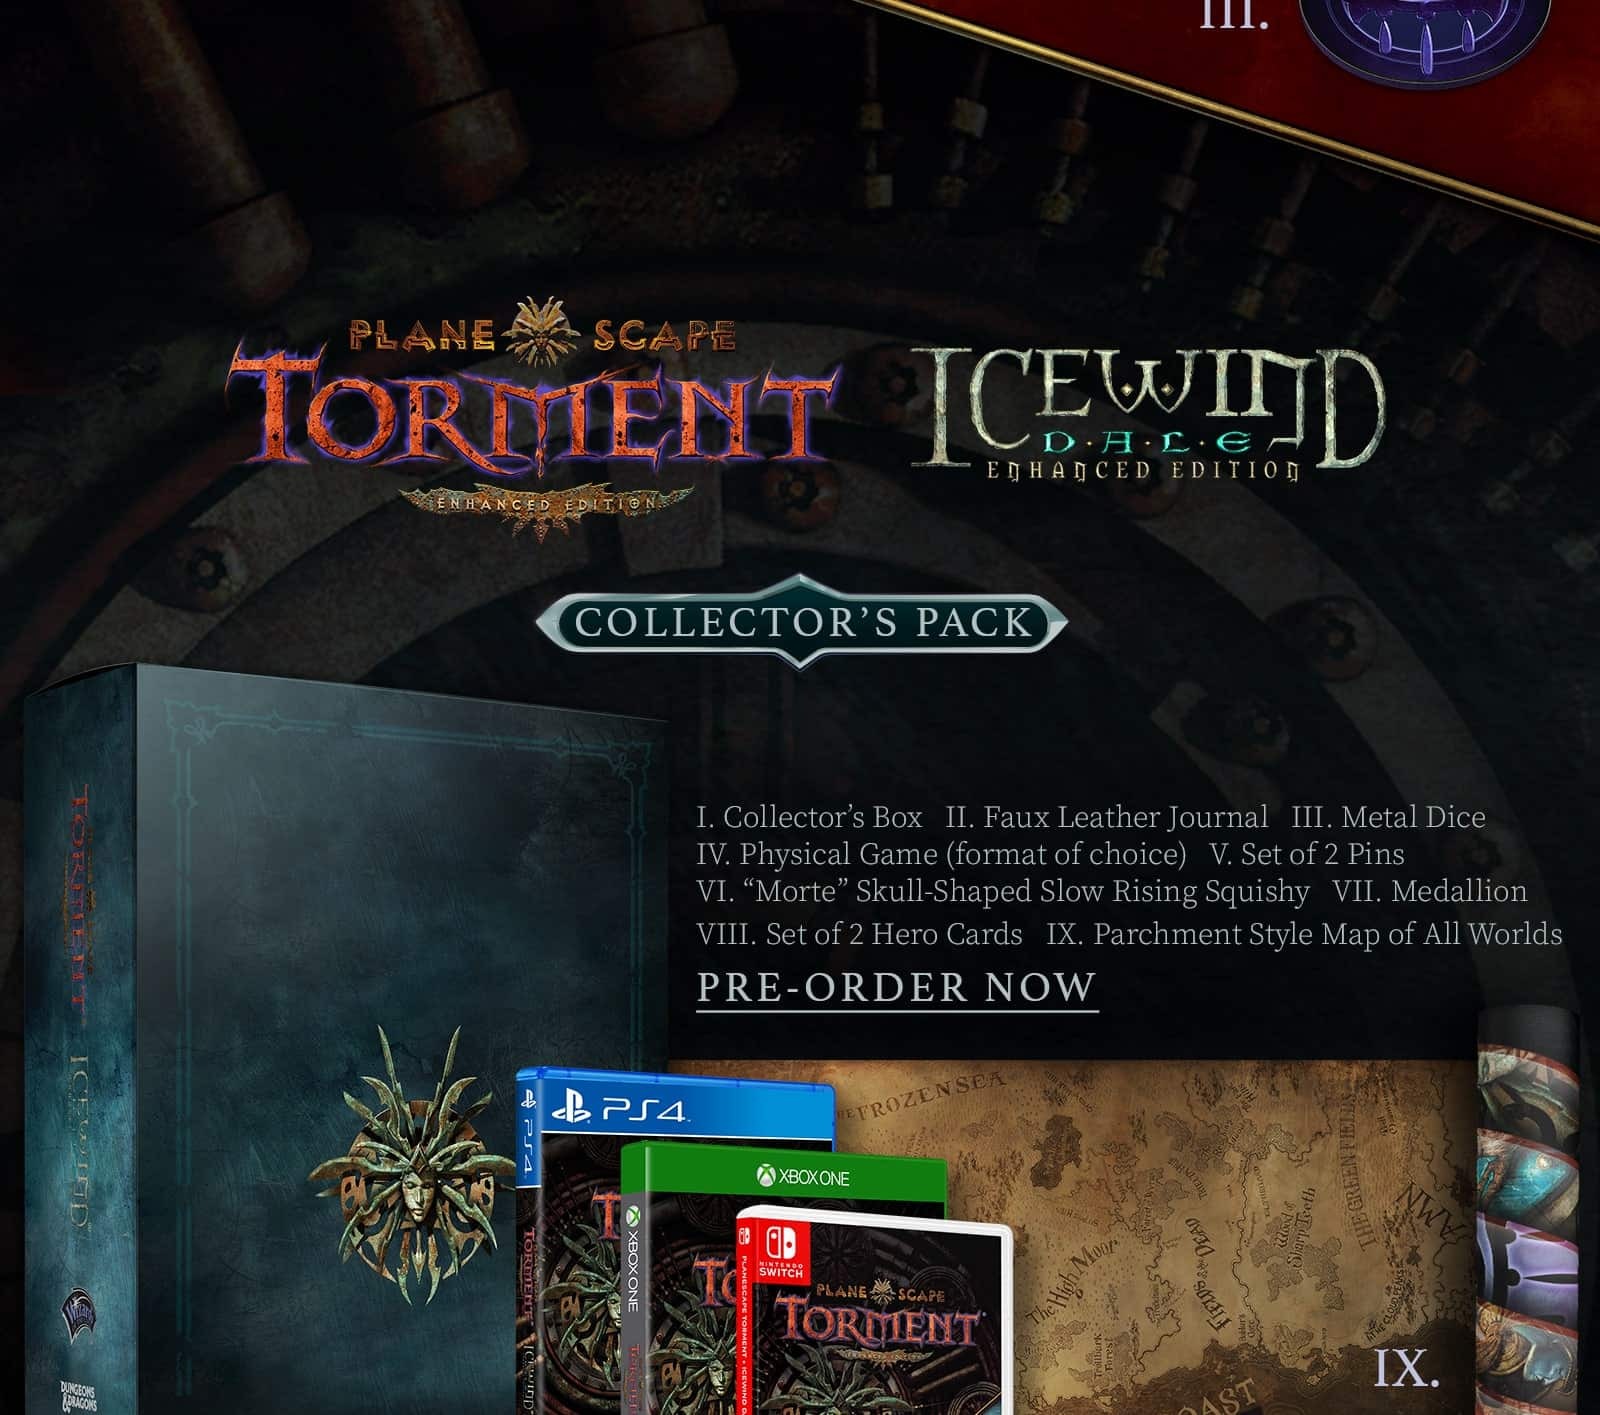 Planescape Torment Icewind Dale Enhanced Editions Collectors Pack